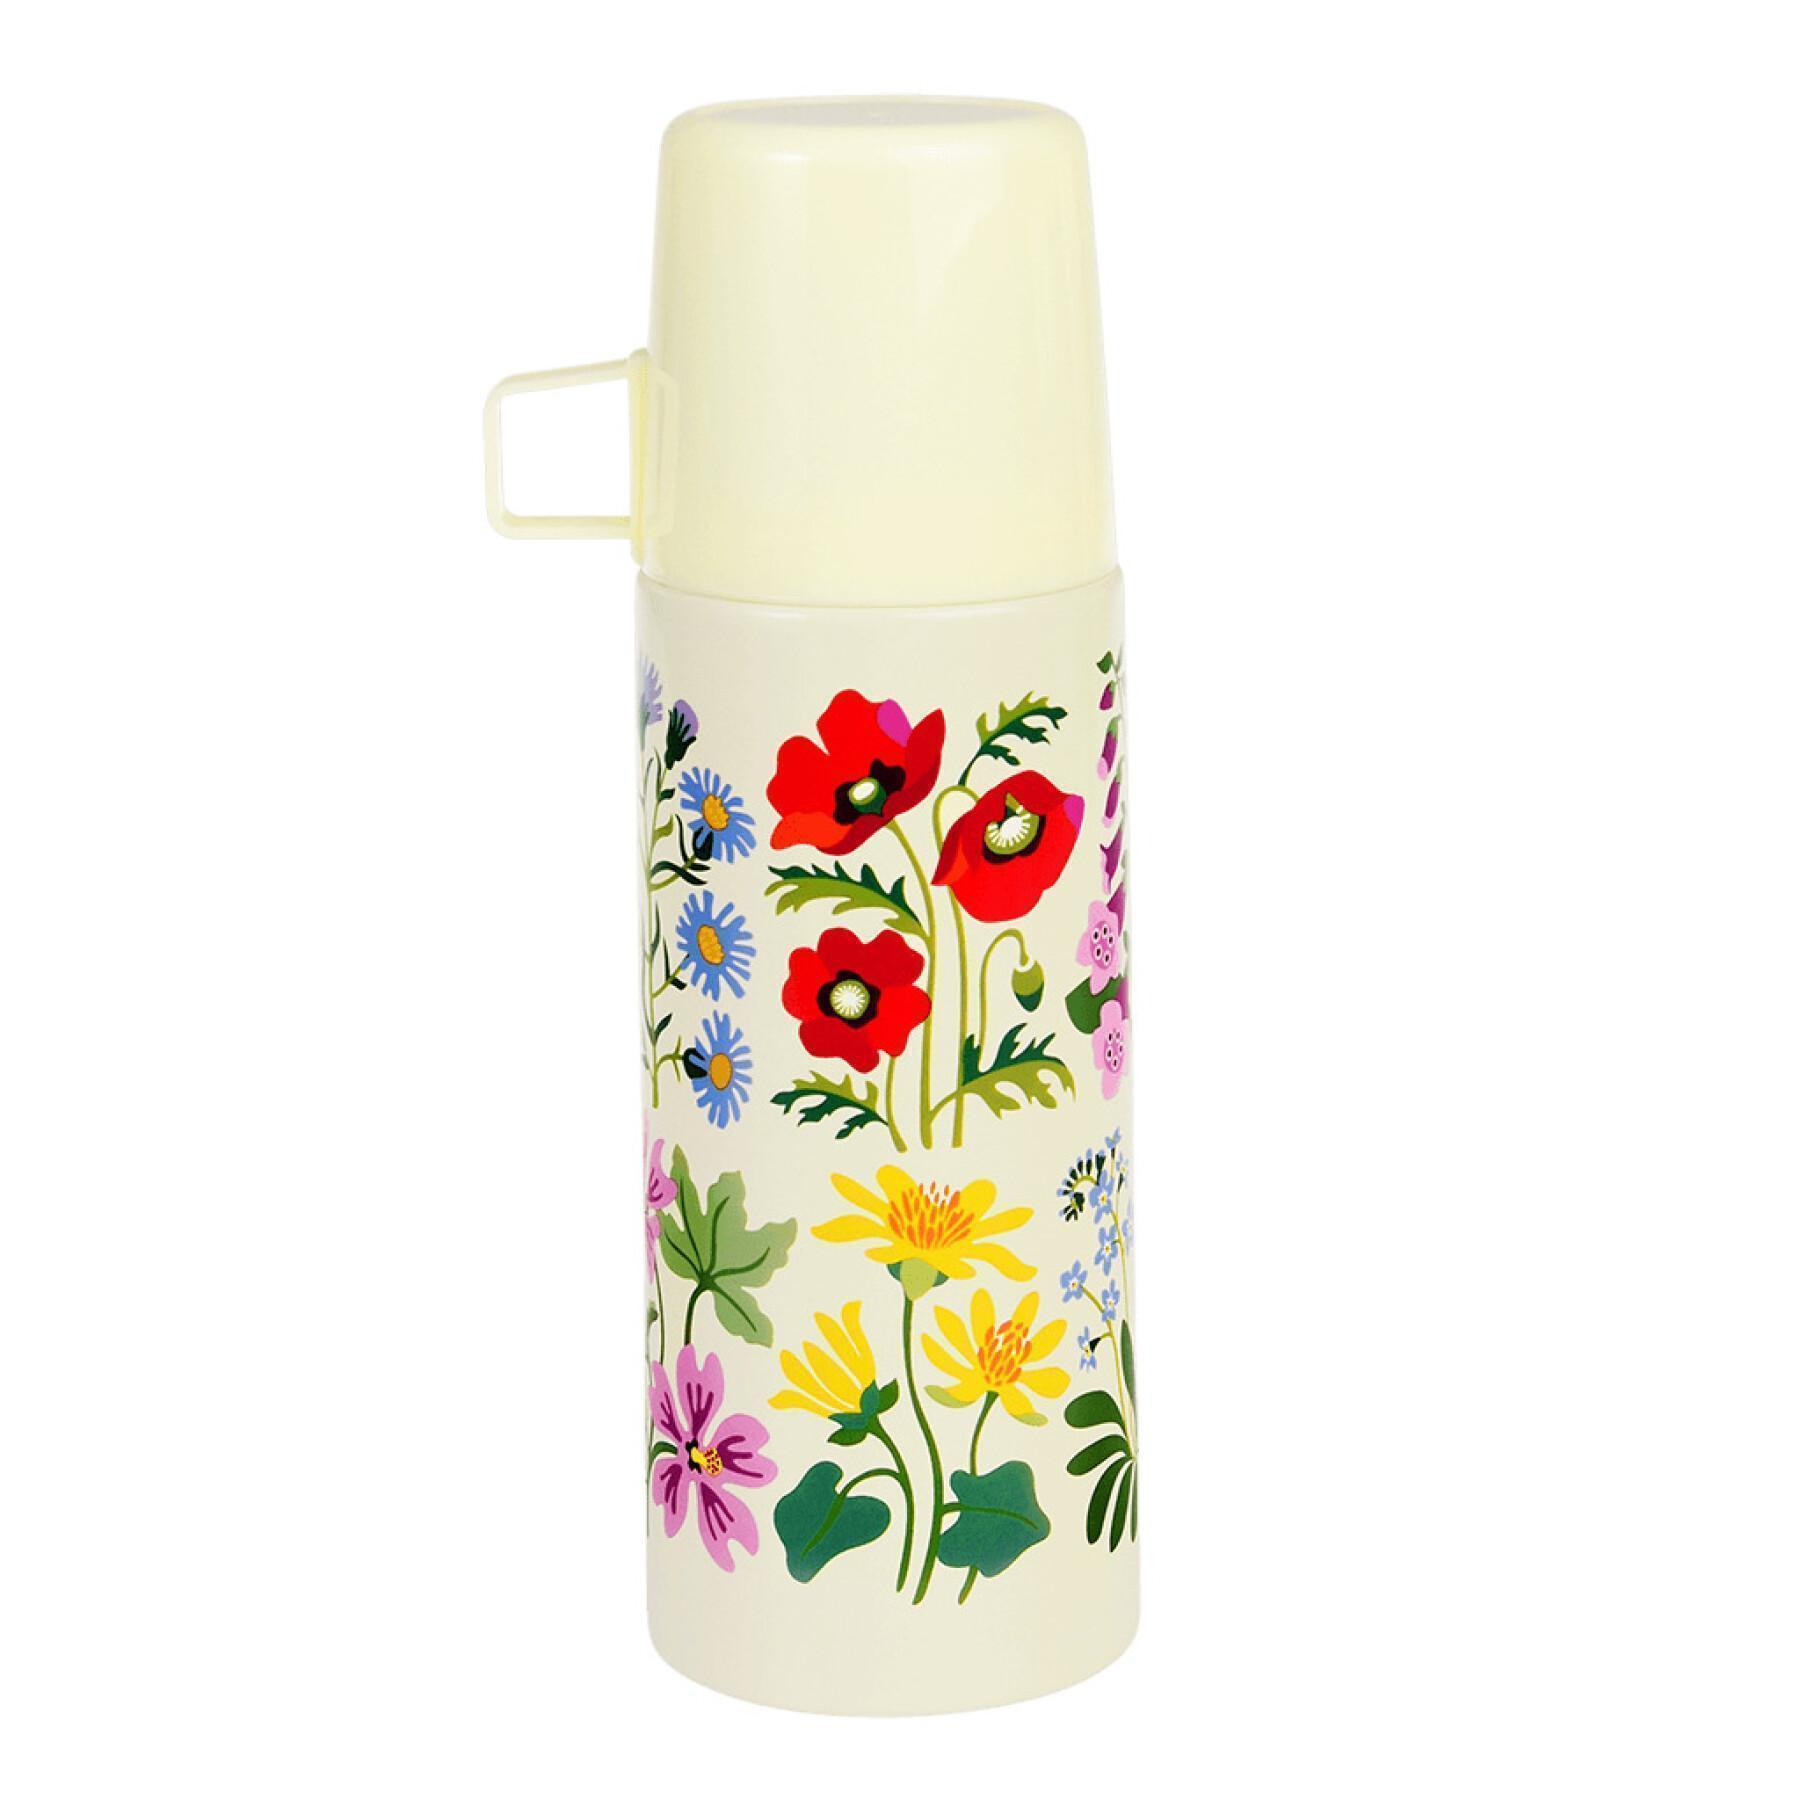 Childrens bottle and cup Rex London Wild Flowers